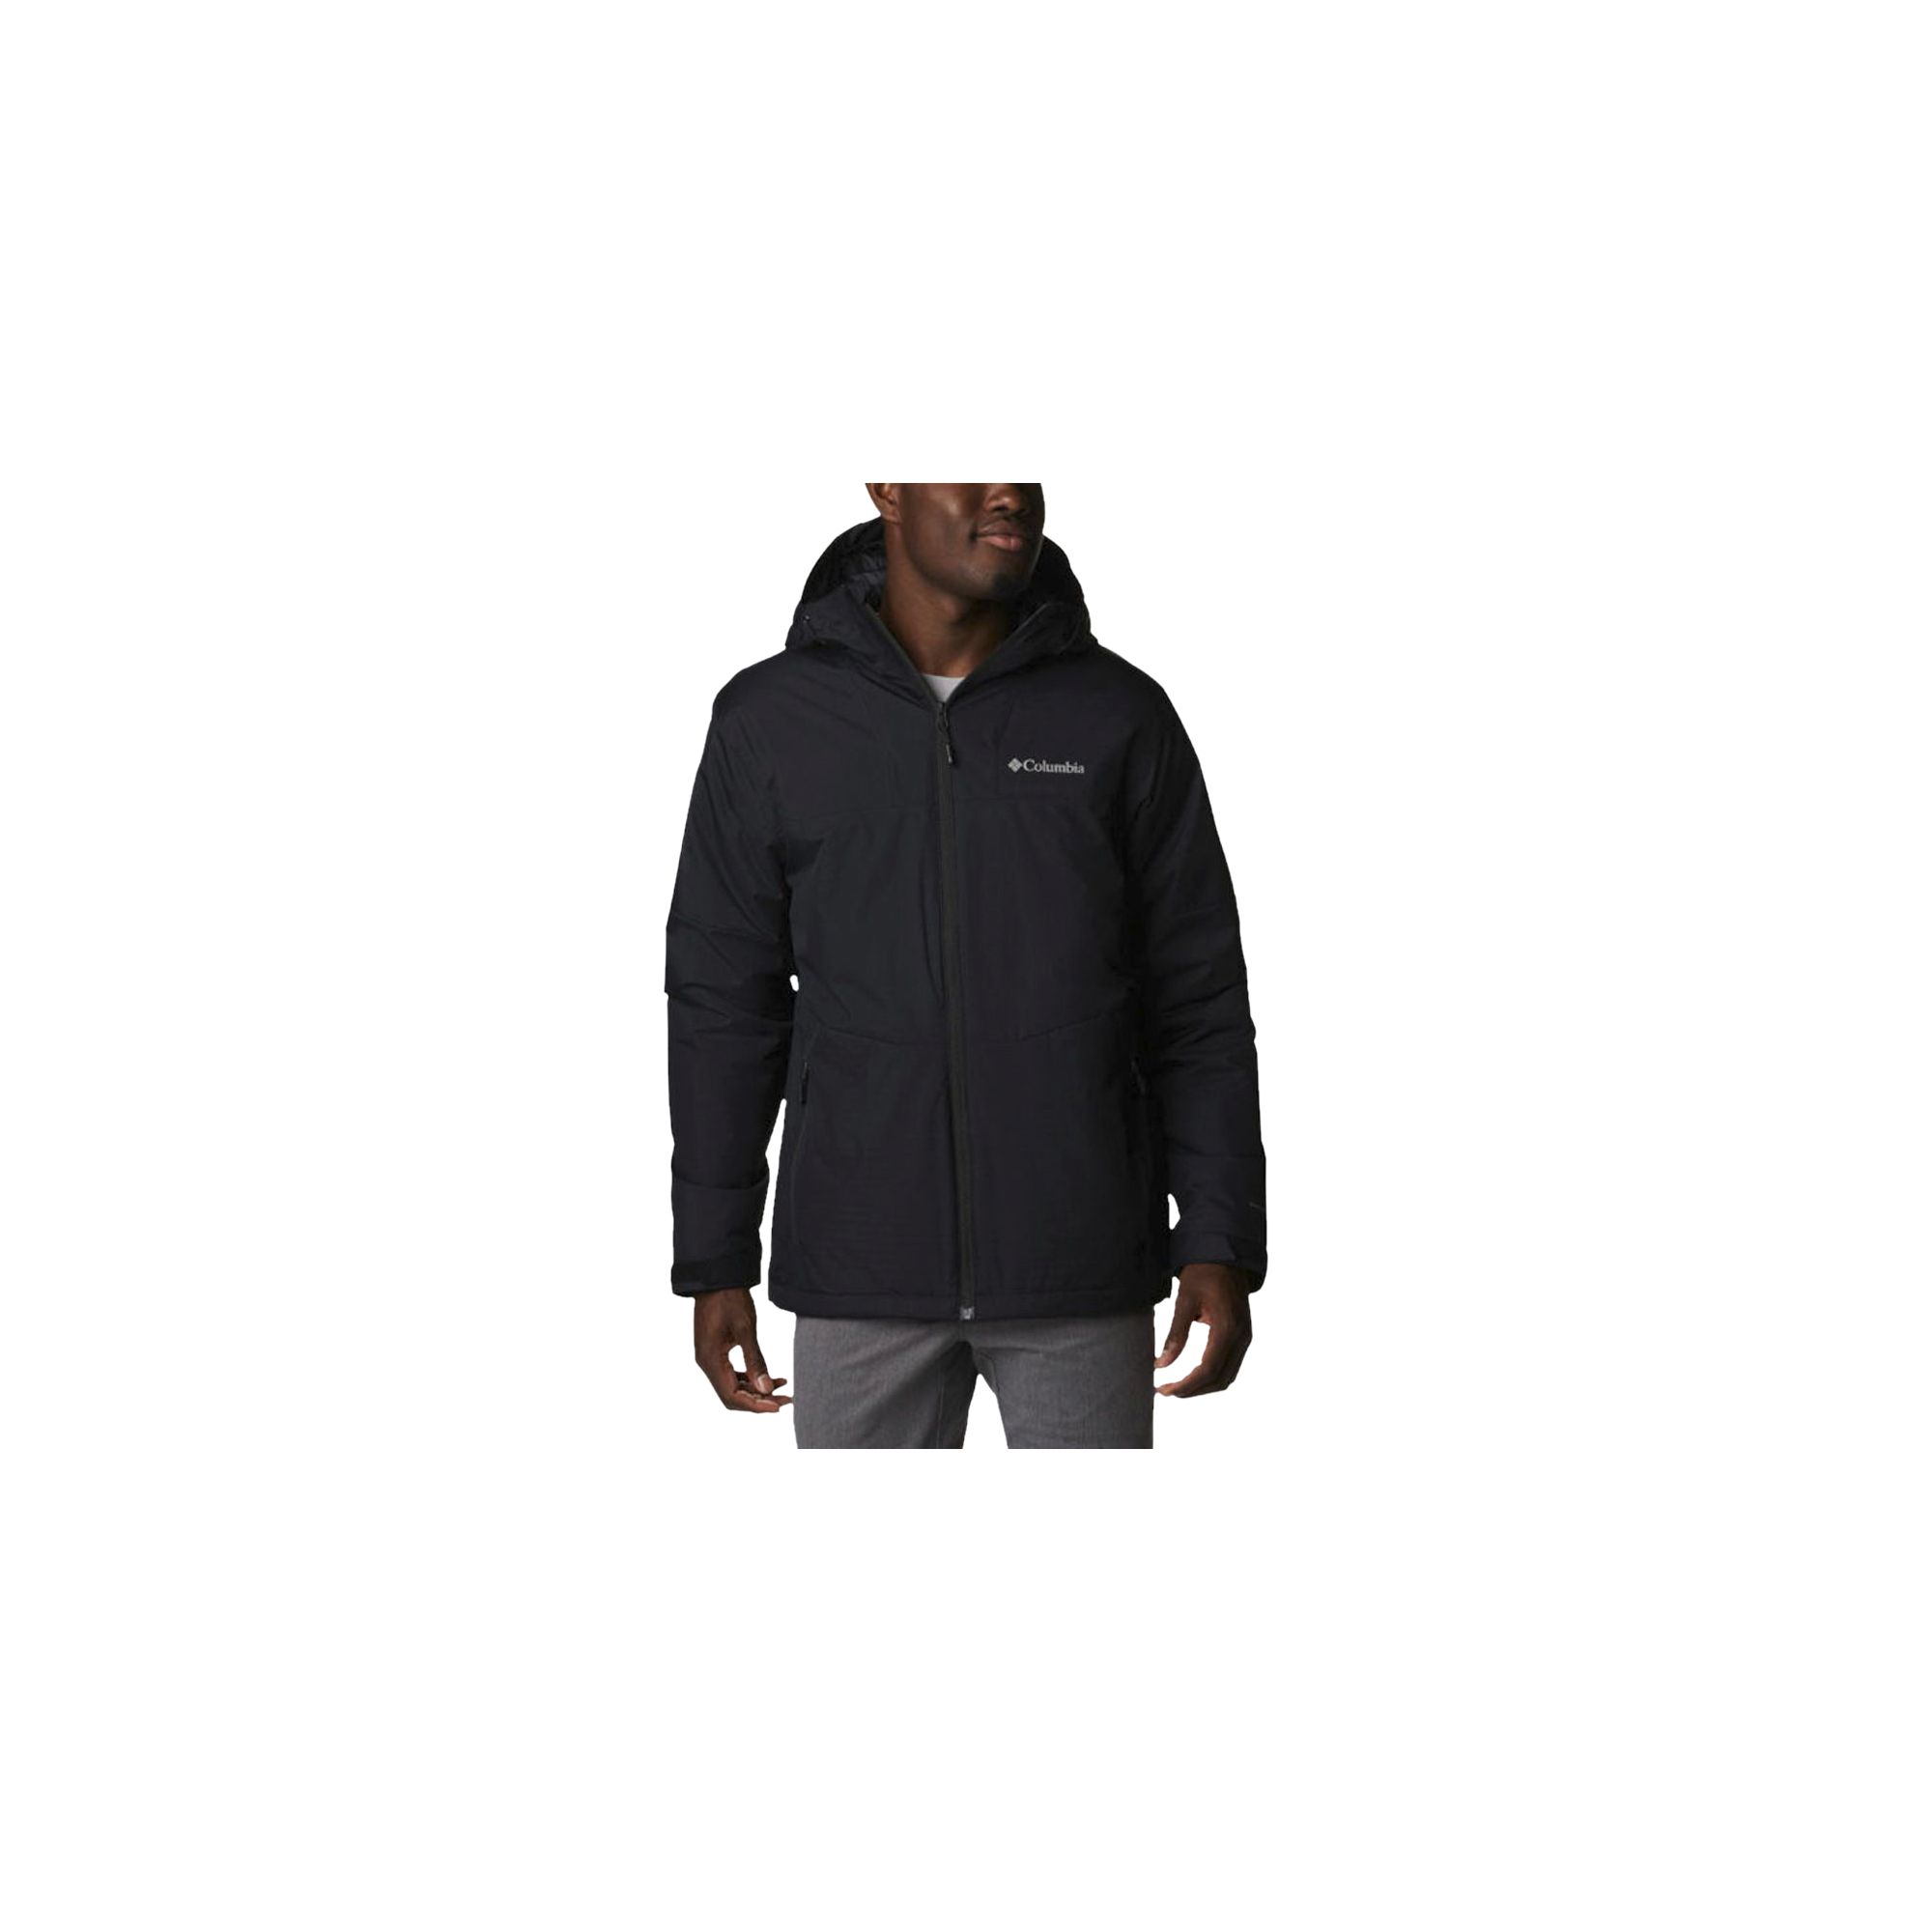 Point Park insulated Columbia Columbia